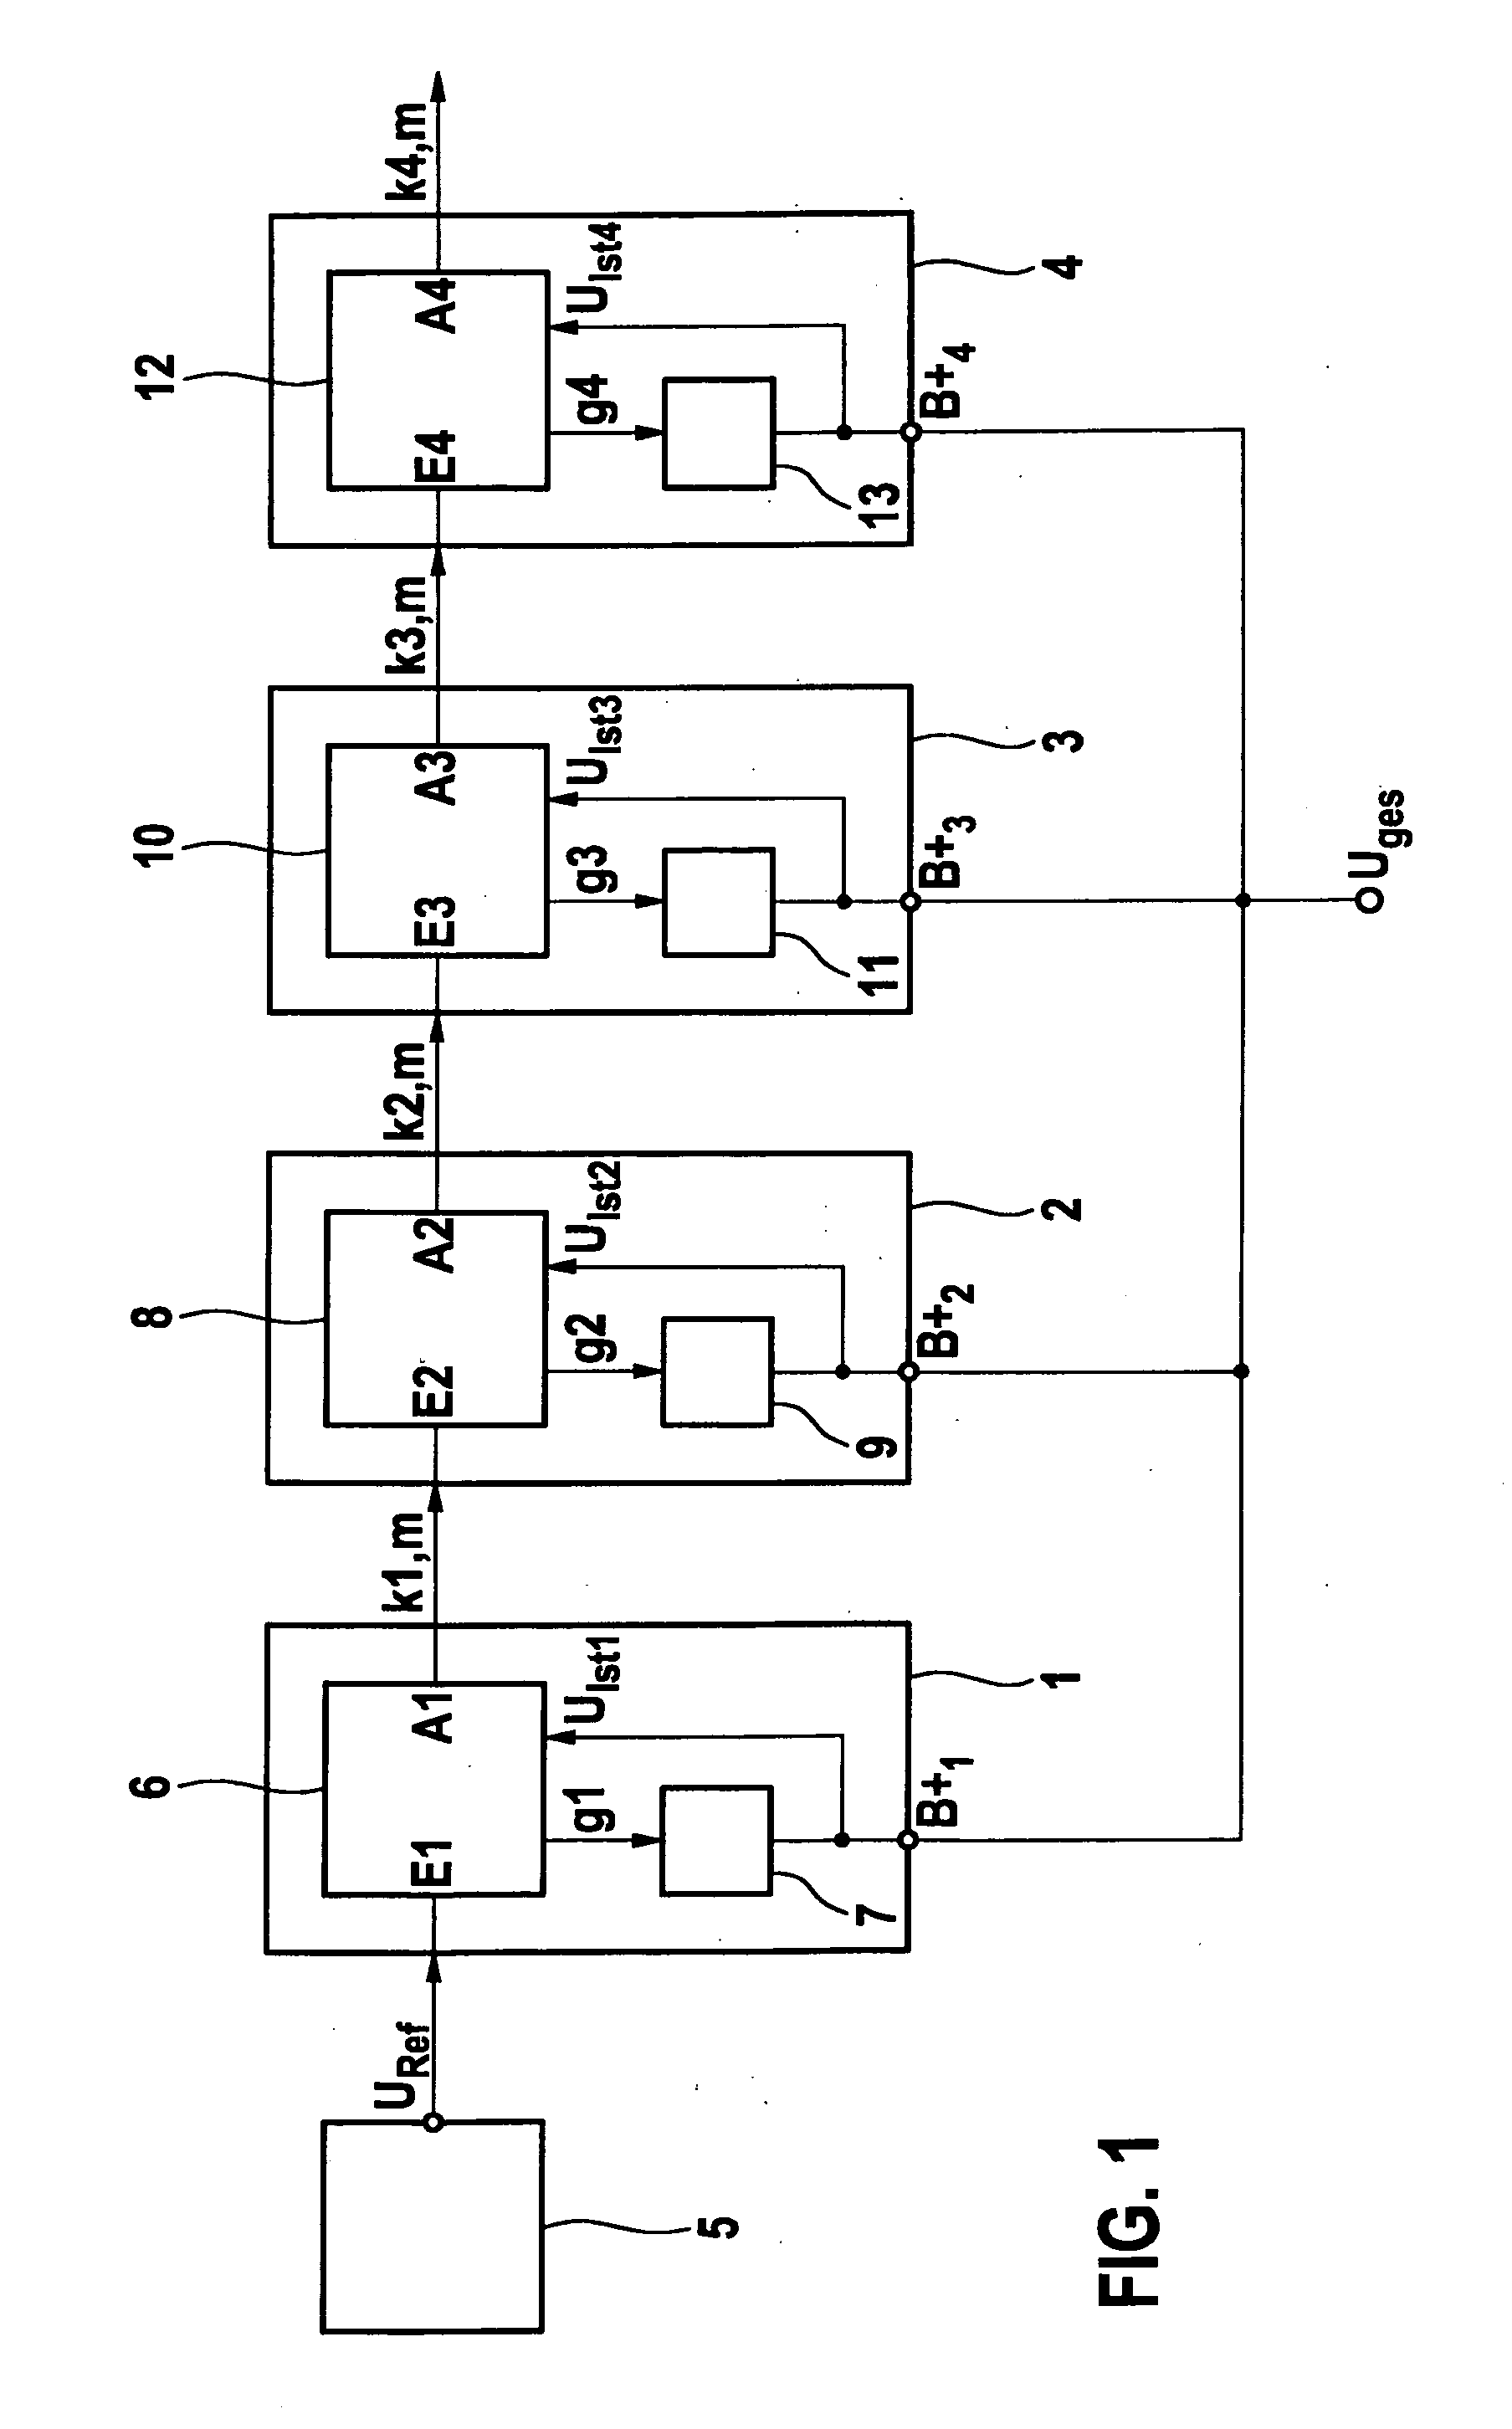 Method and Device for Providing a Supply Voltage by Means of Generator Units Connected in Parallel